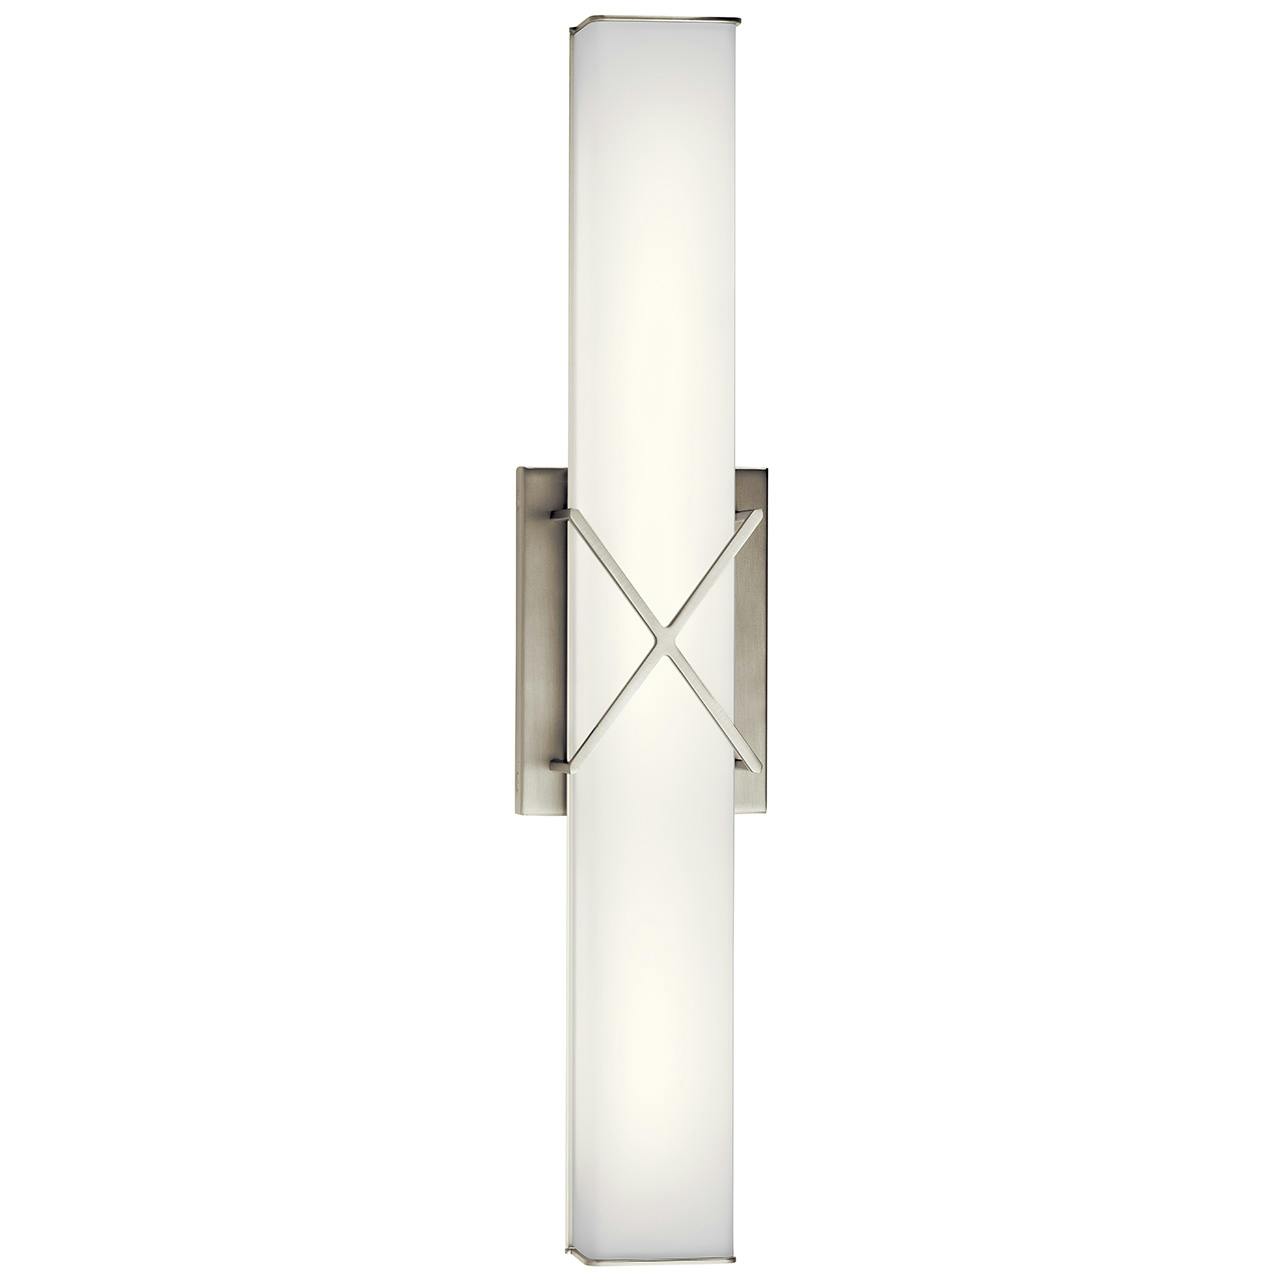 Trinsic™ 22" LED Vanity Light Nickel hung vertically on a white background